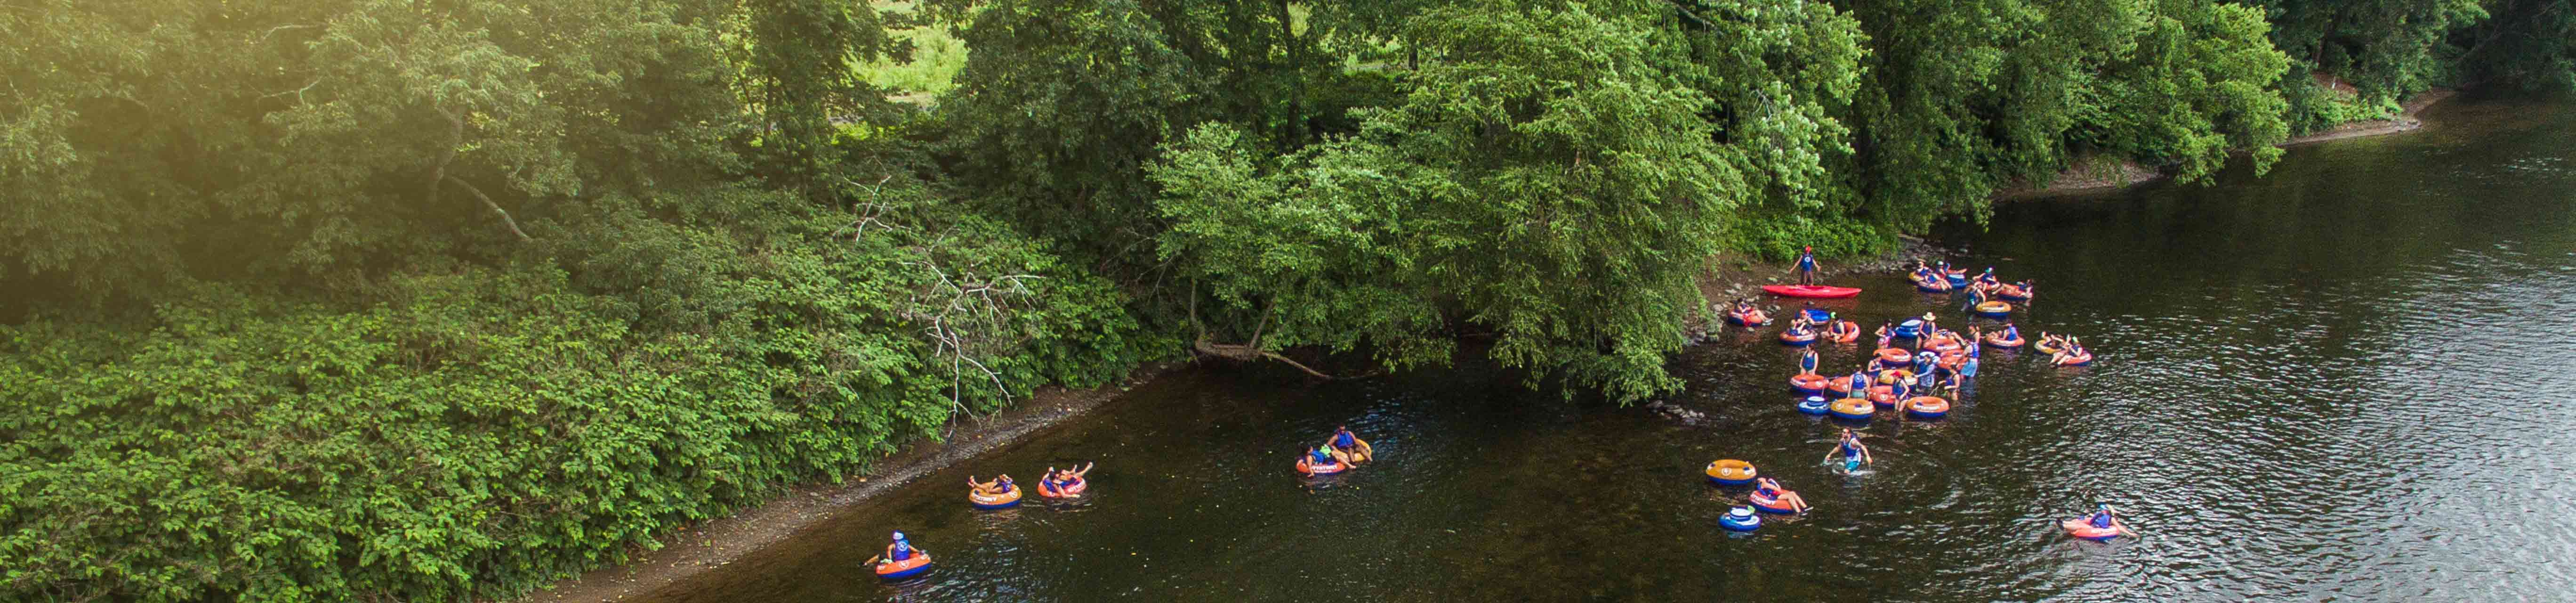 River Tubing & Brewery Tour from NYC - Sourced Adventures | Sourced ...